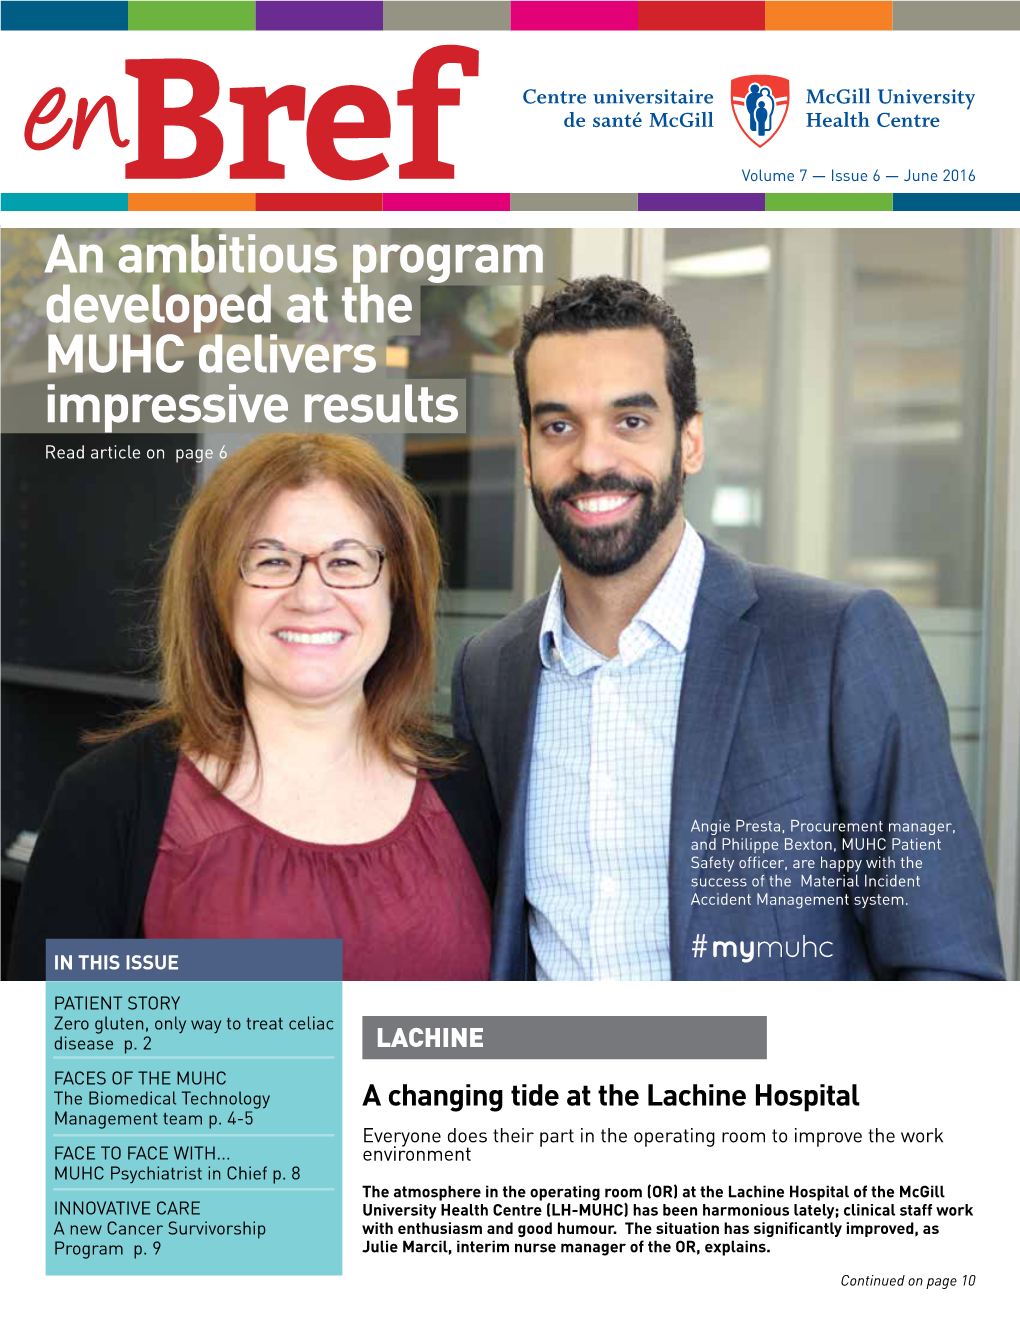 An Ambitious Program Developed at the MUHC Delivers Impressive Results Read Article on Page 6